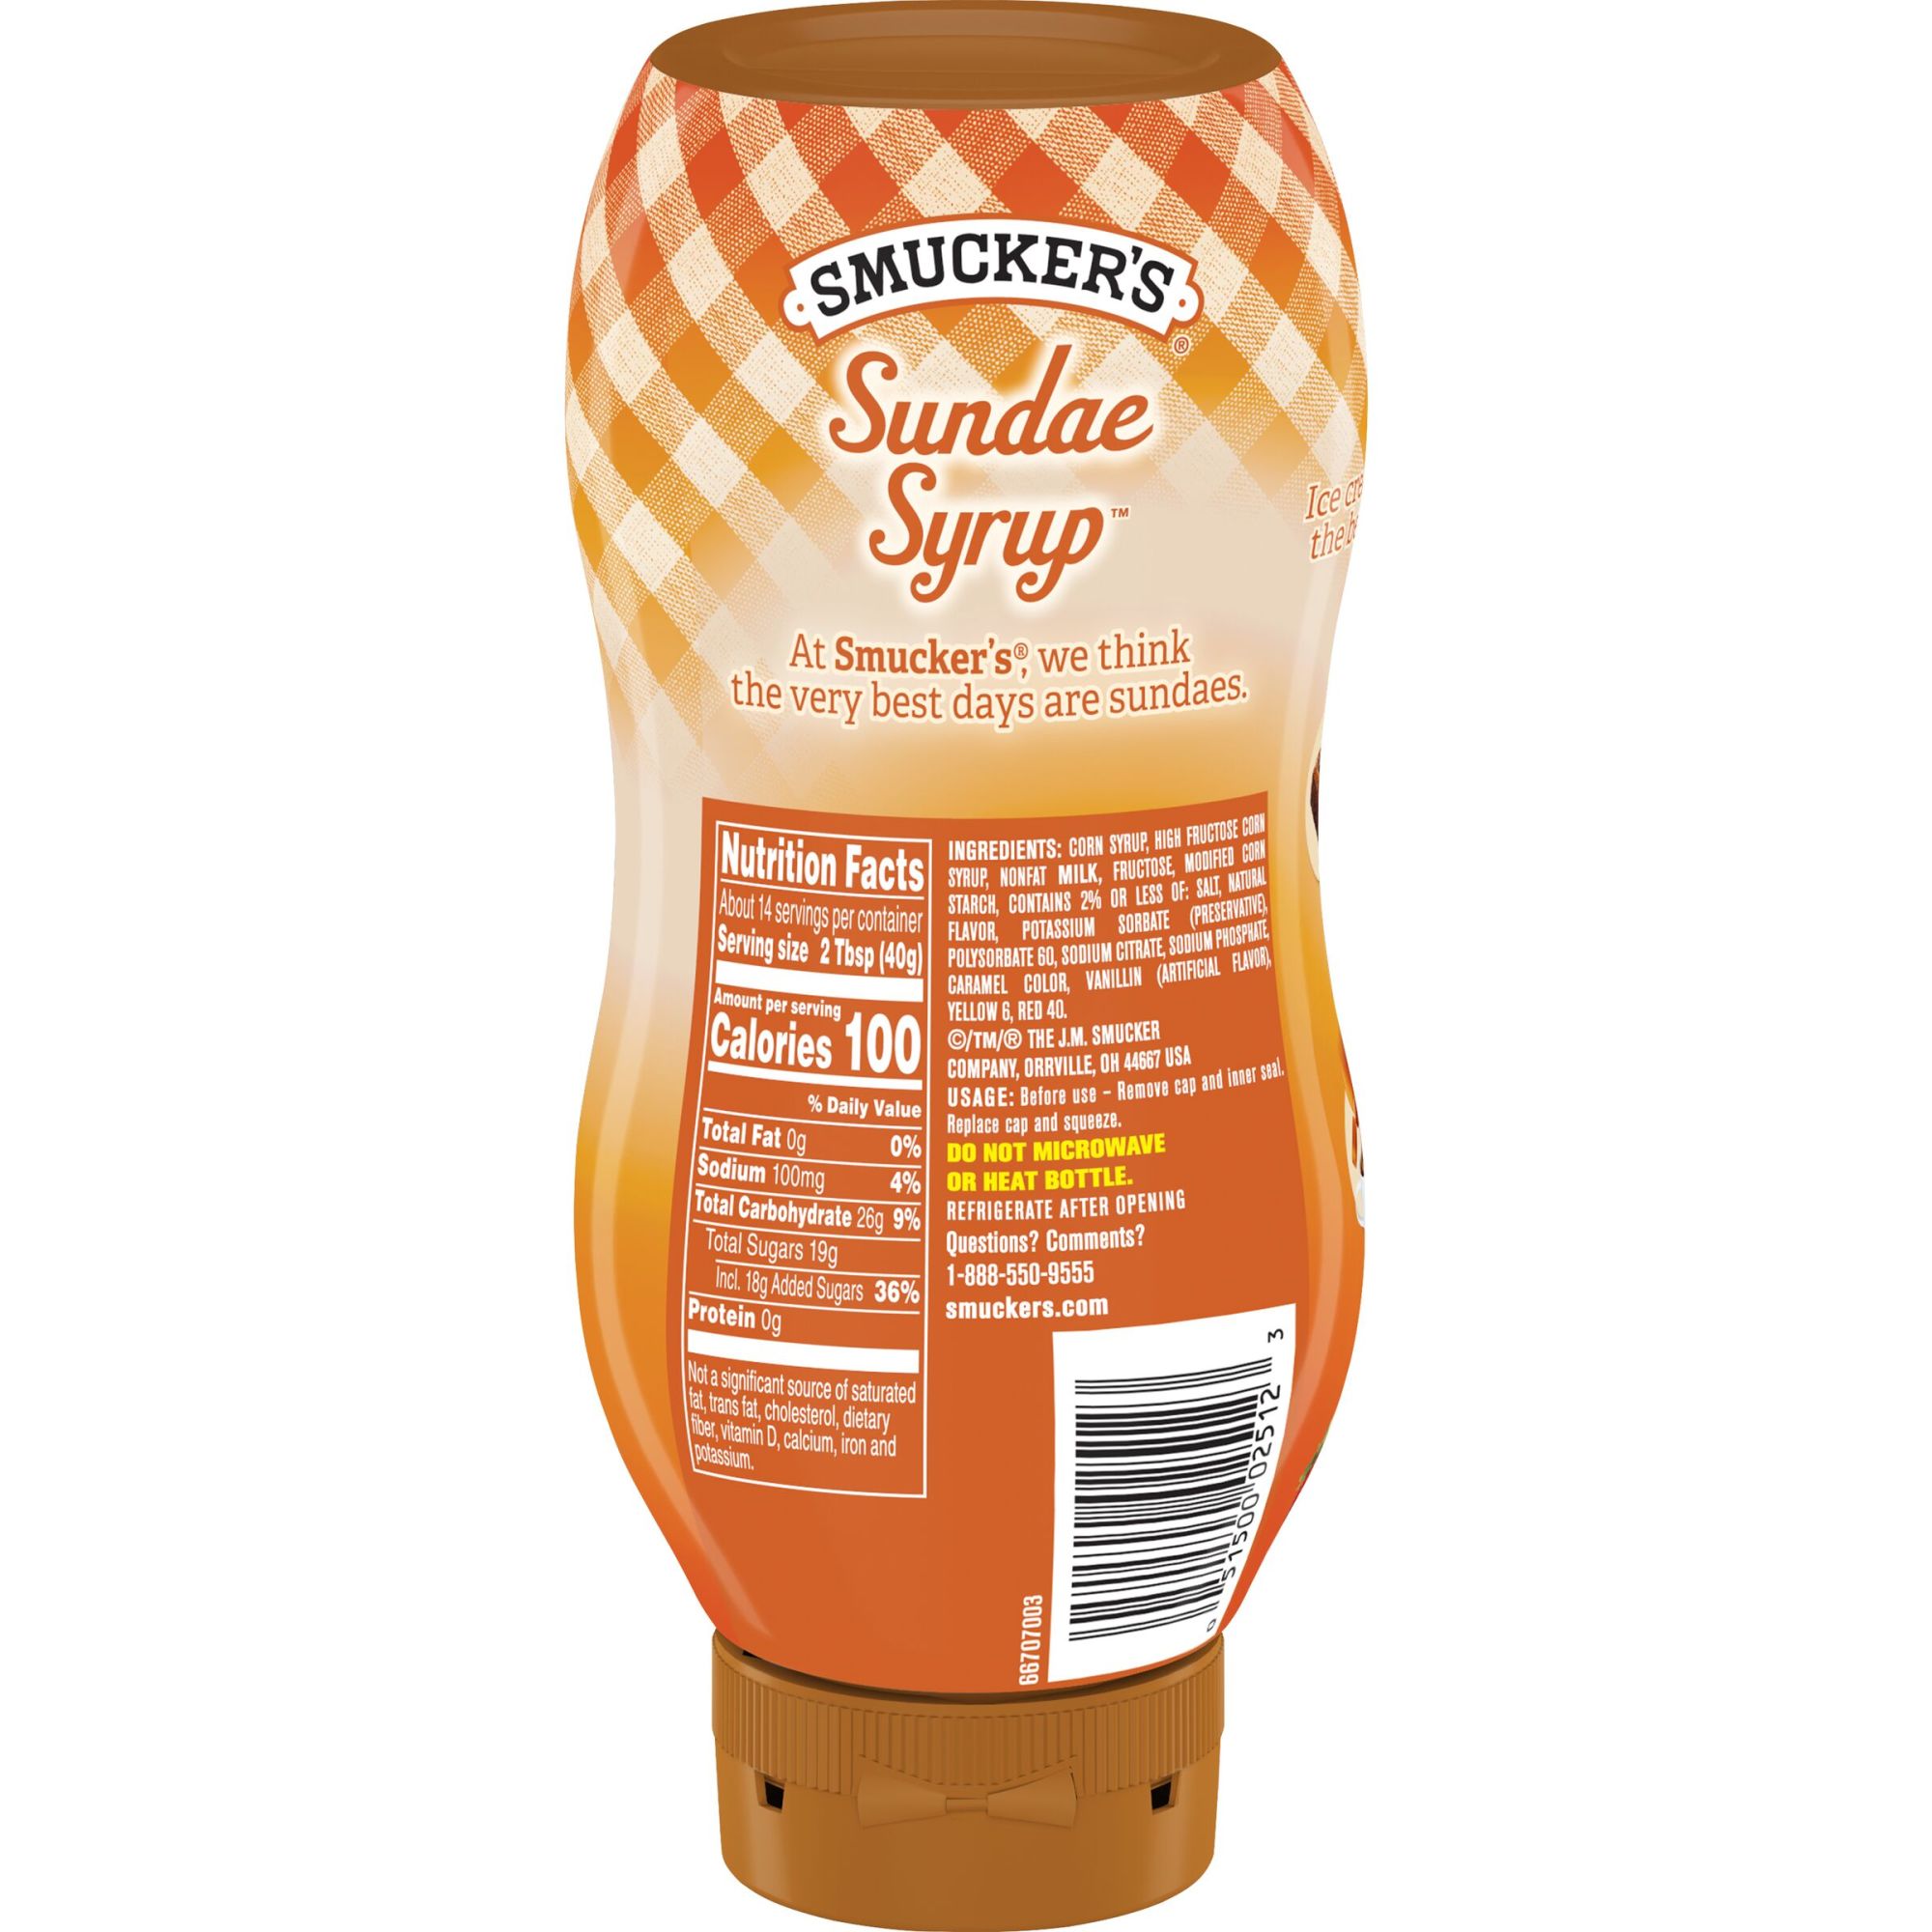 Smucker's Sundae Syrup Caramel Flavored Syrup, 20 Ounces - image 3 of 7